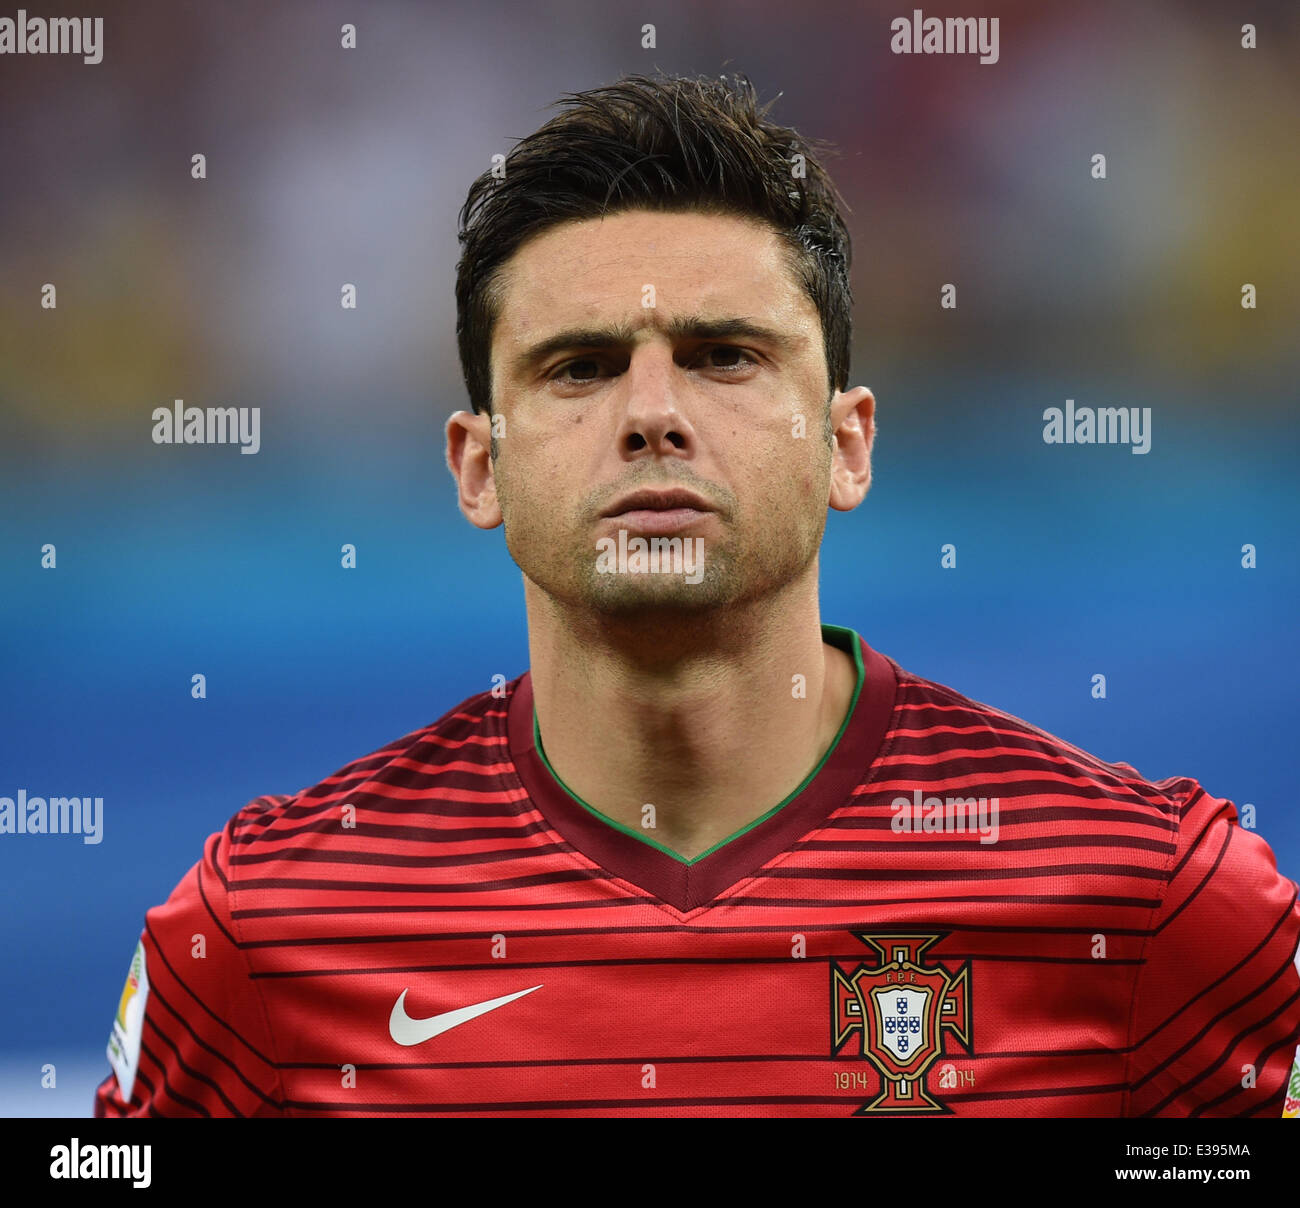 Manaus, Brazil. 22nd June, 2014. Helder Postiga of Portugal seen during the national anthem prior to the FIFA World Cup 2014 group G preliminary round match between the USA and Portugal at the Arena Amazonia Stadium in Manaus, Brazil, 22 June 2014. Photo: Marius Becker/dpa/Alamy Live News Stock Photo